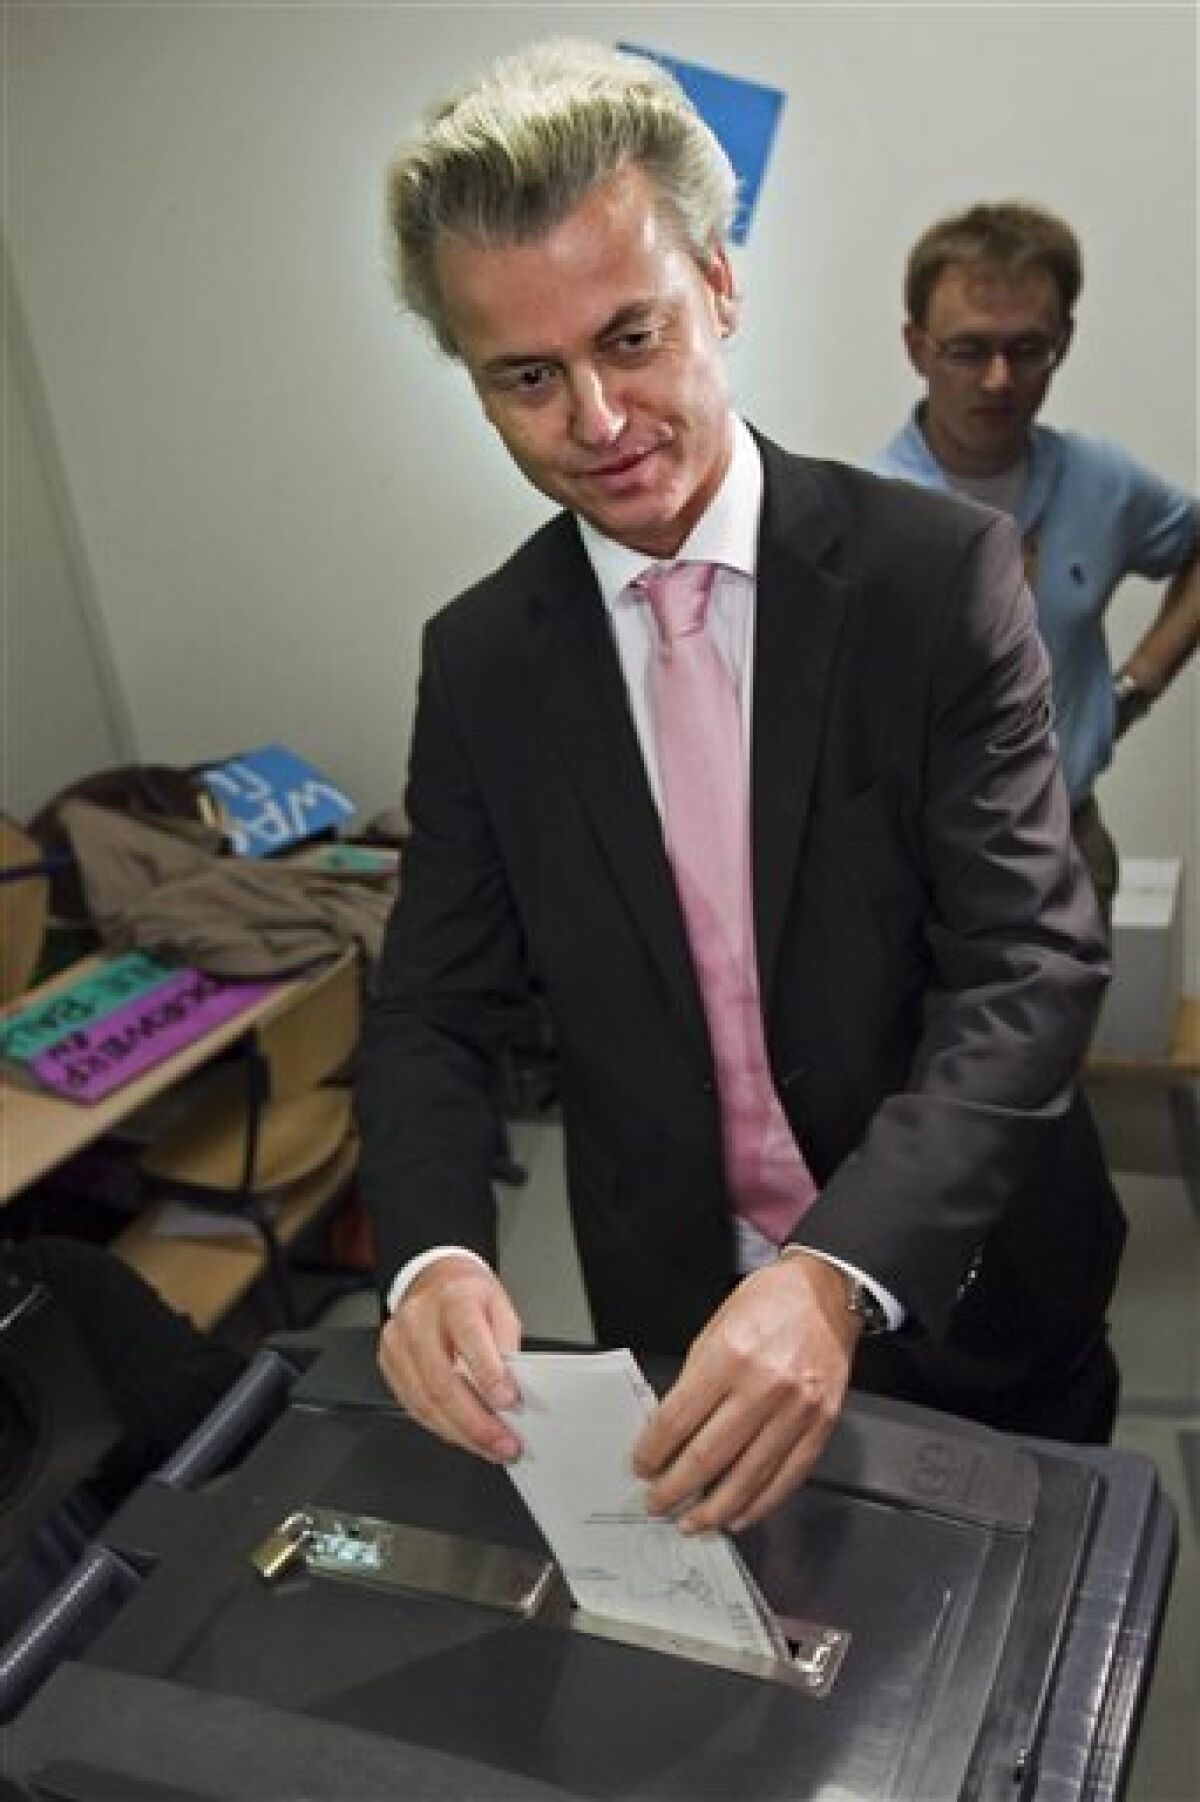 Populist anti-Islam leader Geert Wilders, center, casts his ballot in general elections in The Hague, Netherlands, Wednesday June 9, 2010. Polls opened Wednesday in the Netherlands where Dutch voters will elect a new parliament after an election campaign focused on economic and immigration policy. The conservative VVD party and its leader Mark Rutte are leading in opinion surveys on a deficit-busting, tough-on-immigration platform. The anti-Islam Freedom Party and its leader Geert Wilders also hope to book large gains. (AP Photo/Cynthia Boll)